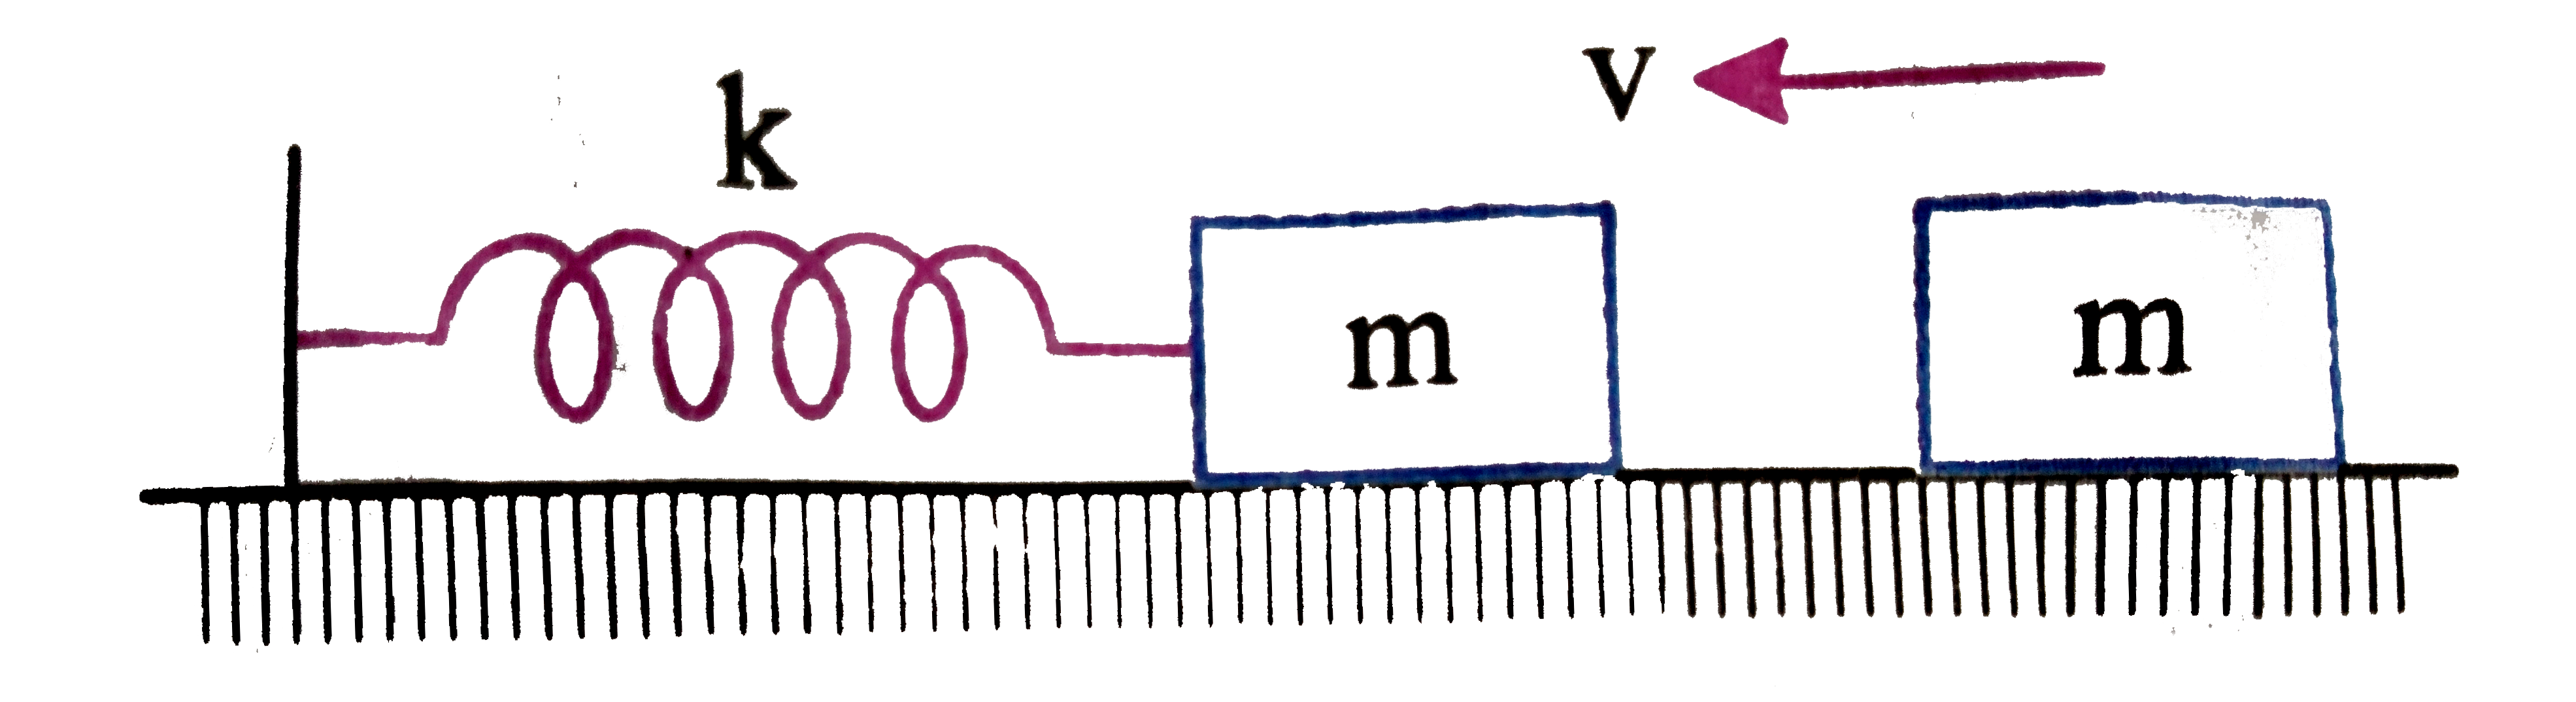 The collision between both blocks shown in figure is completely inelastic. The total energy of oscillation after collision is